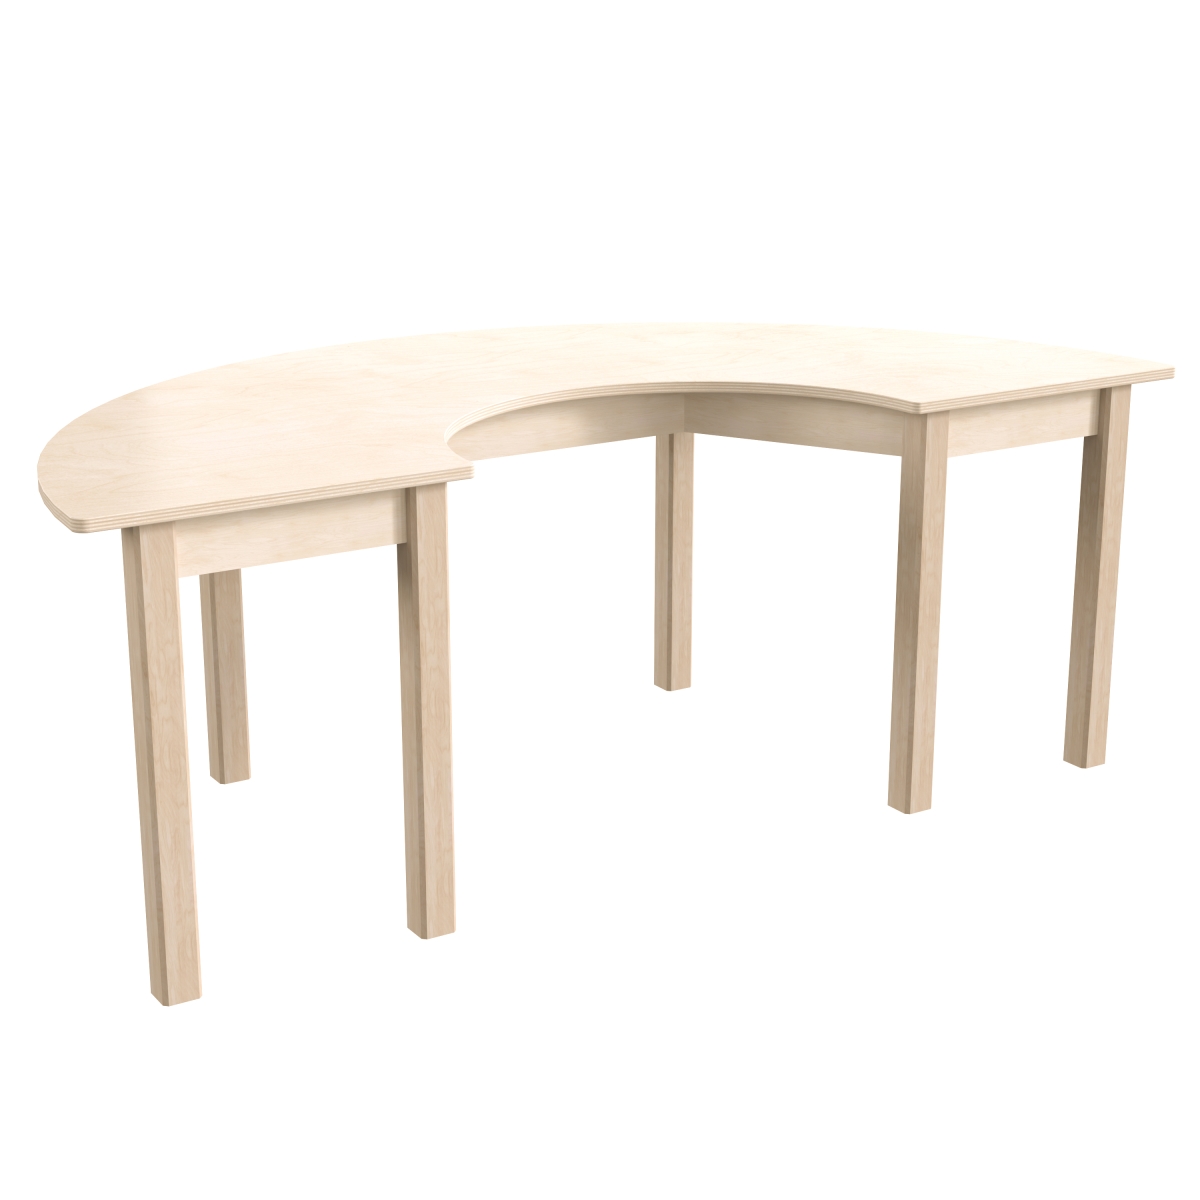 Picture of Flash Furniture MK-ME088015-GG 29.5 x 59 x 21 in. Bright Beginnings Commercial Grade Wooden Half Circle Preschool Classroom Activity Table, Beech